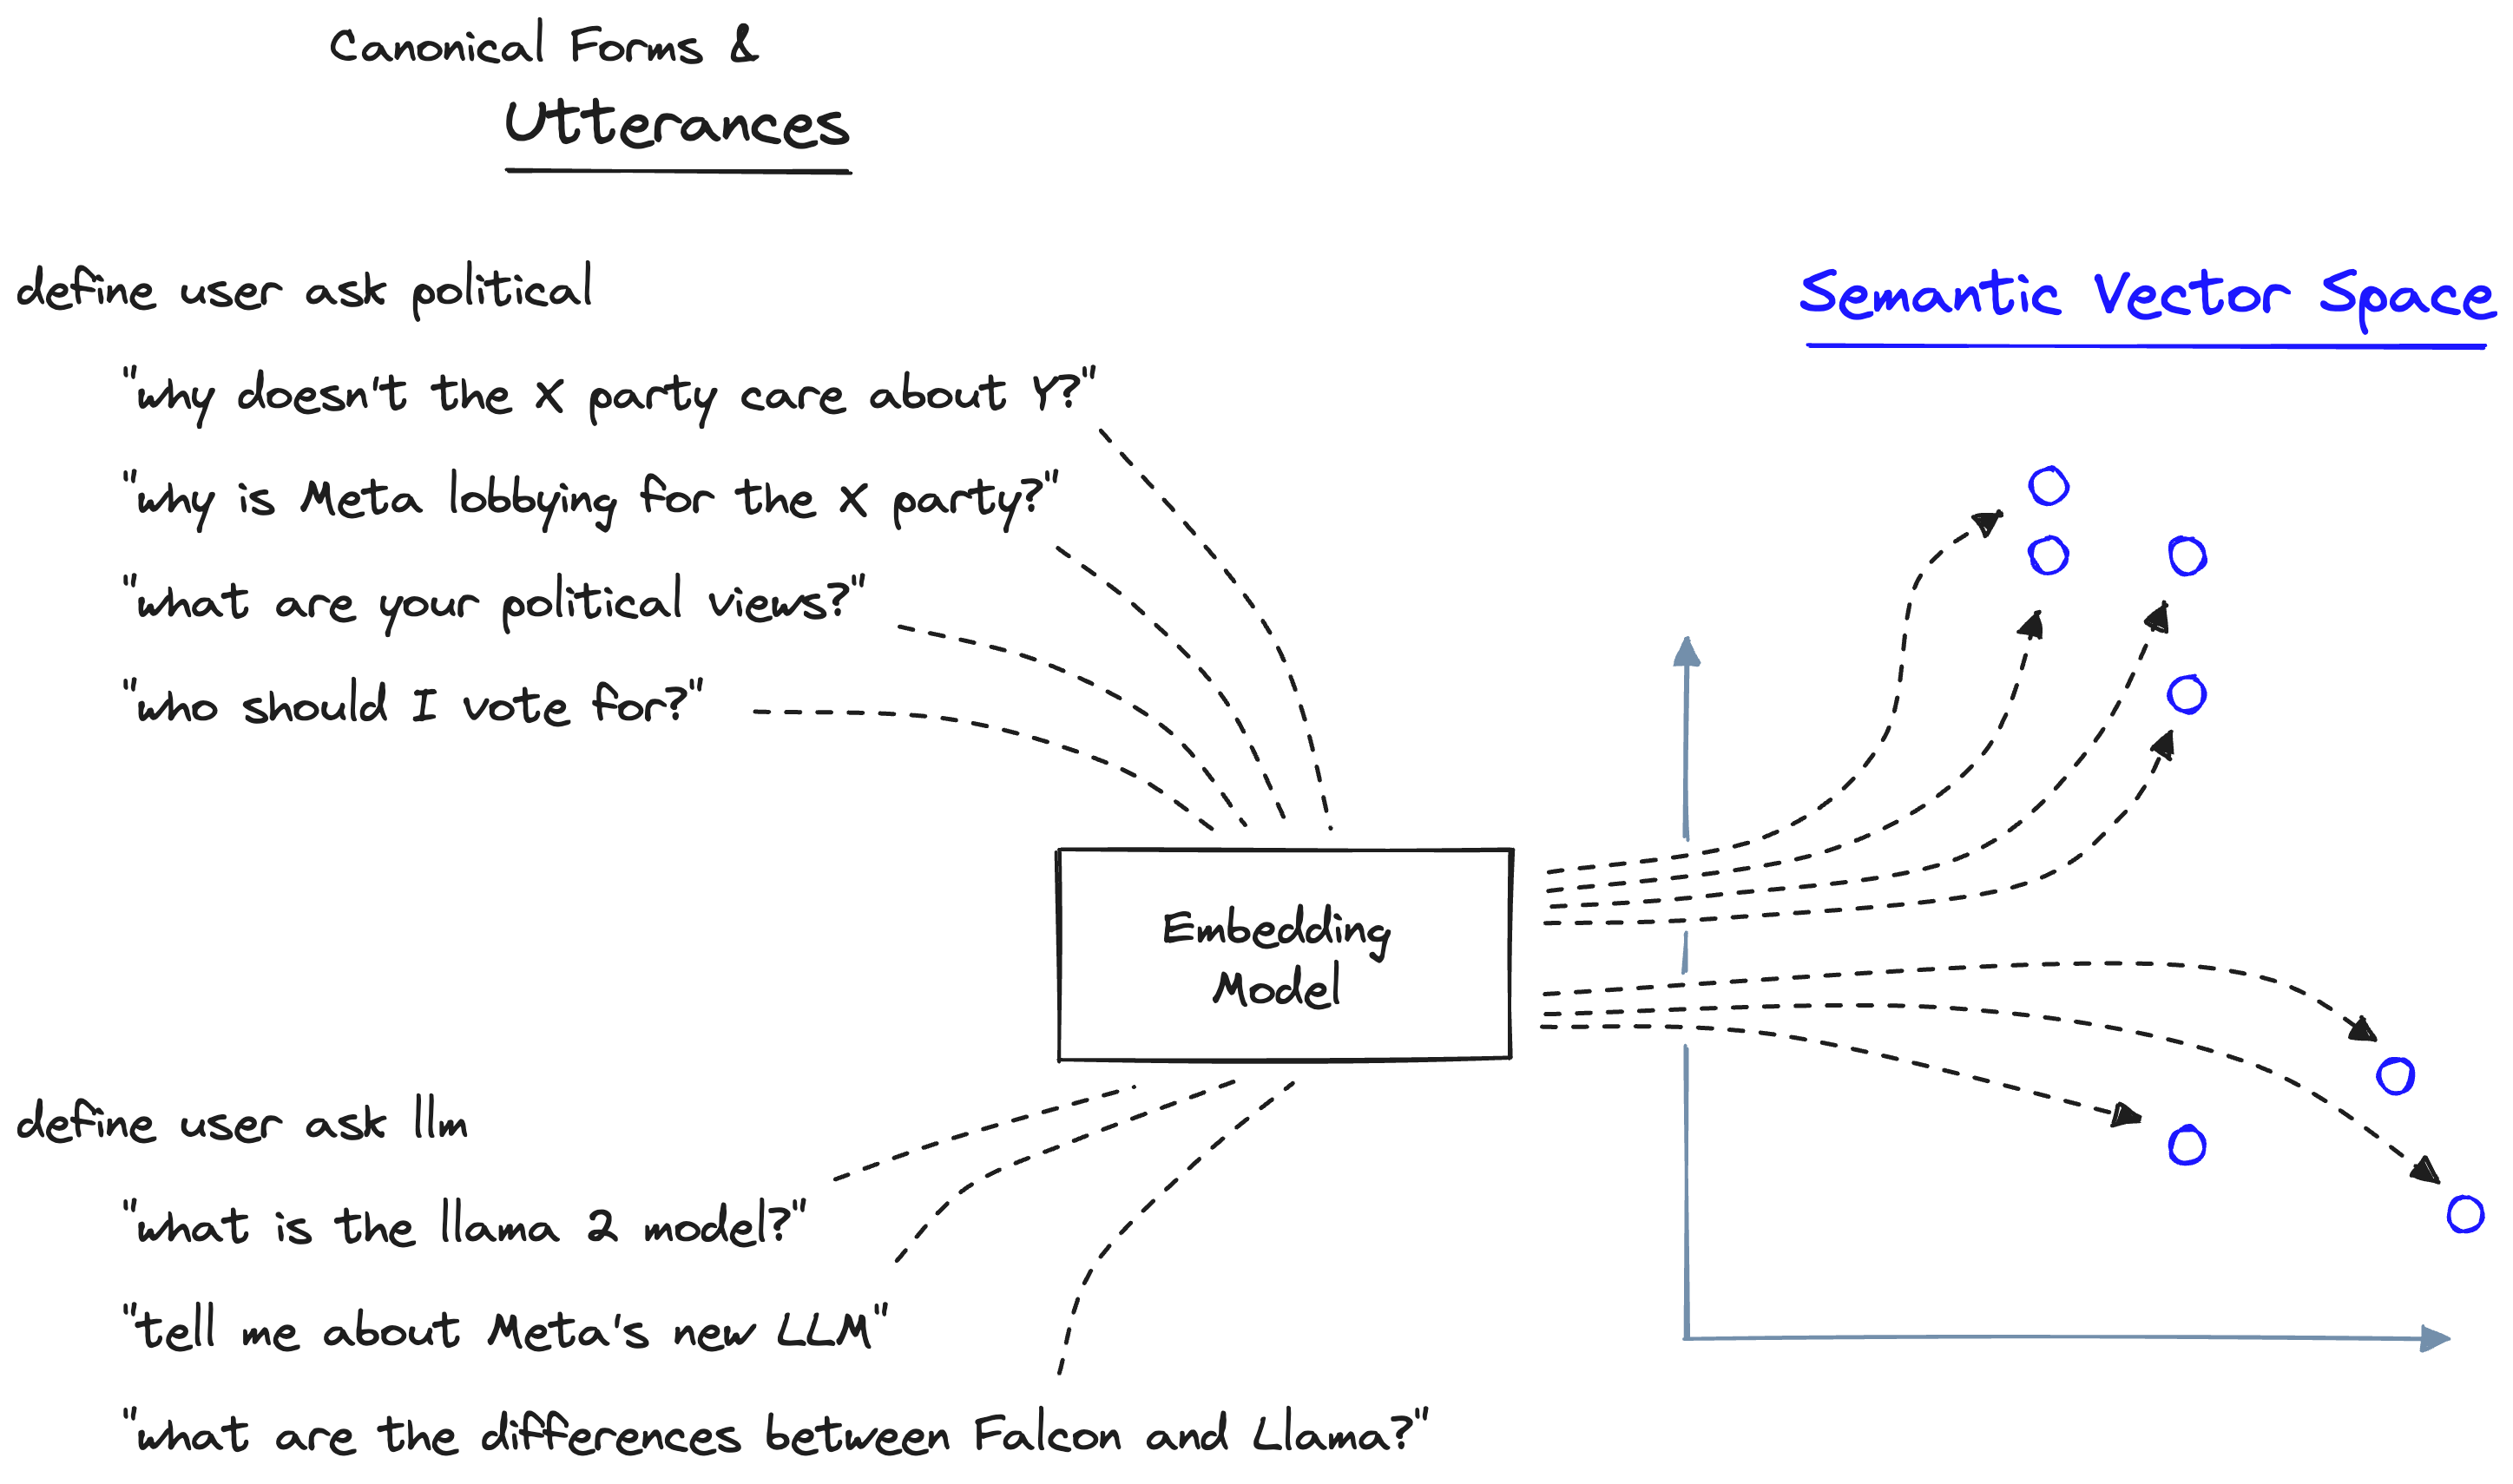 Defining canonical forms (categories of user intent) with example utterances. The utterances are encoded into vector space, giving us a type of classifier function.